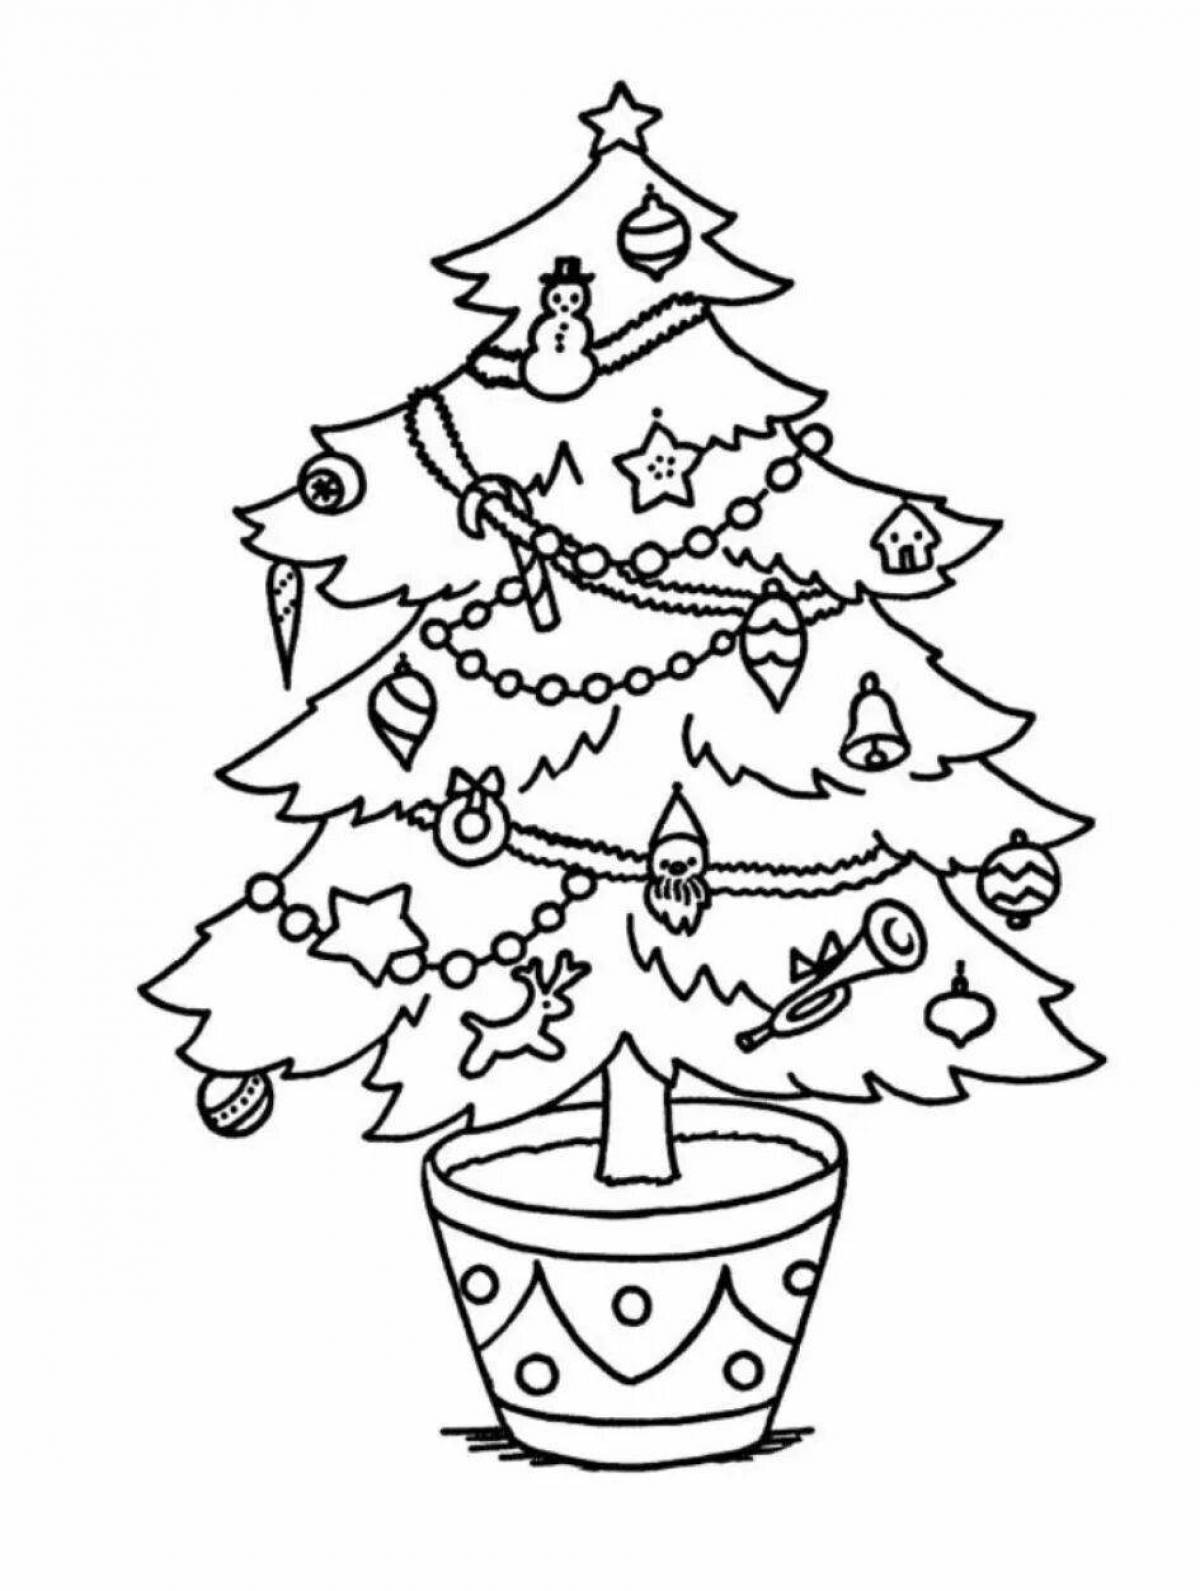 Coloring book dazzling Christmas tree for kids